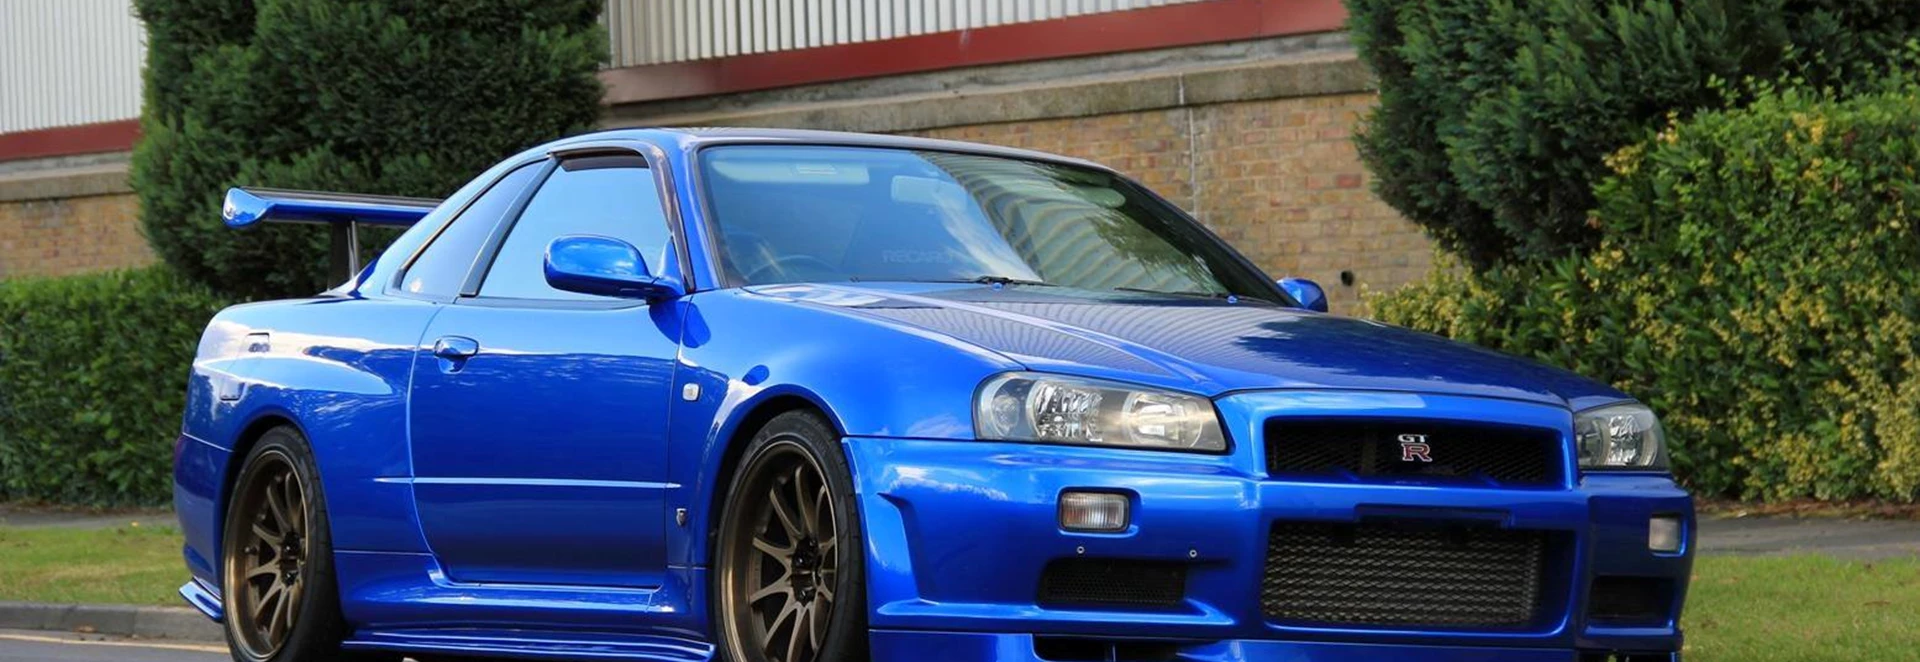 Nissan Skyline crowned most iconic Japanese car ever